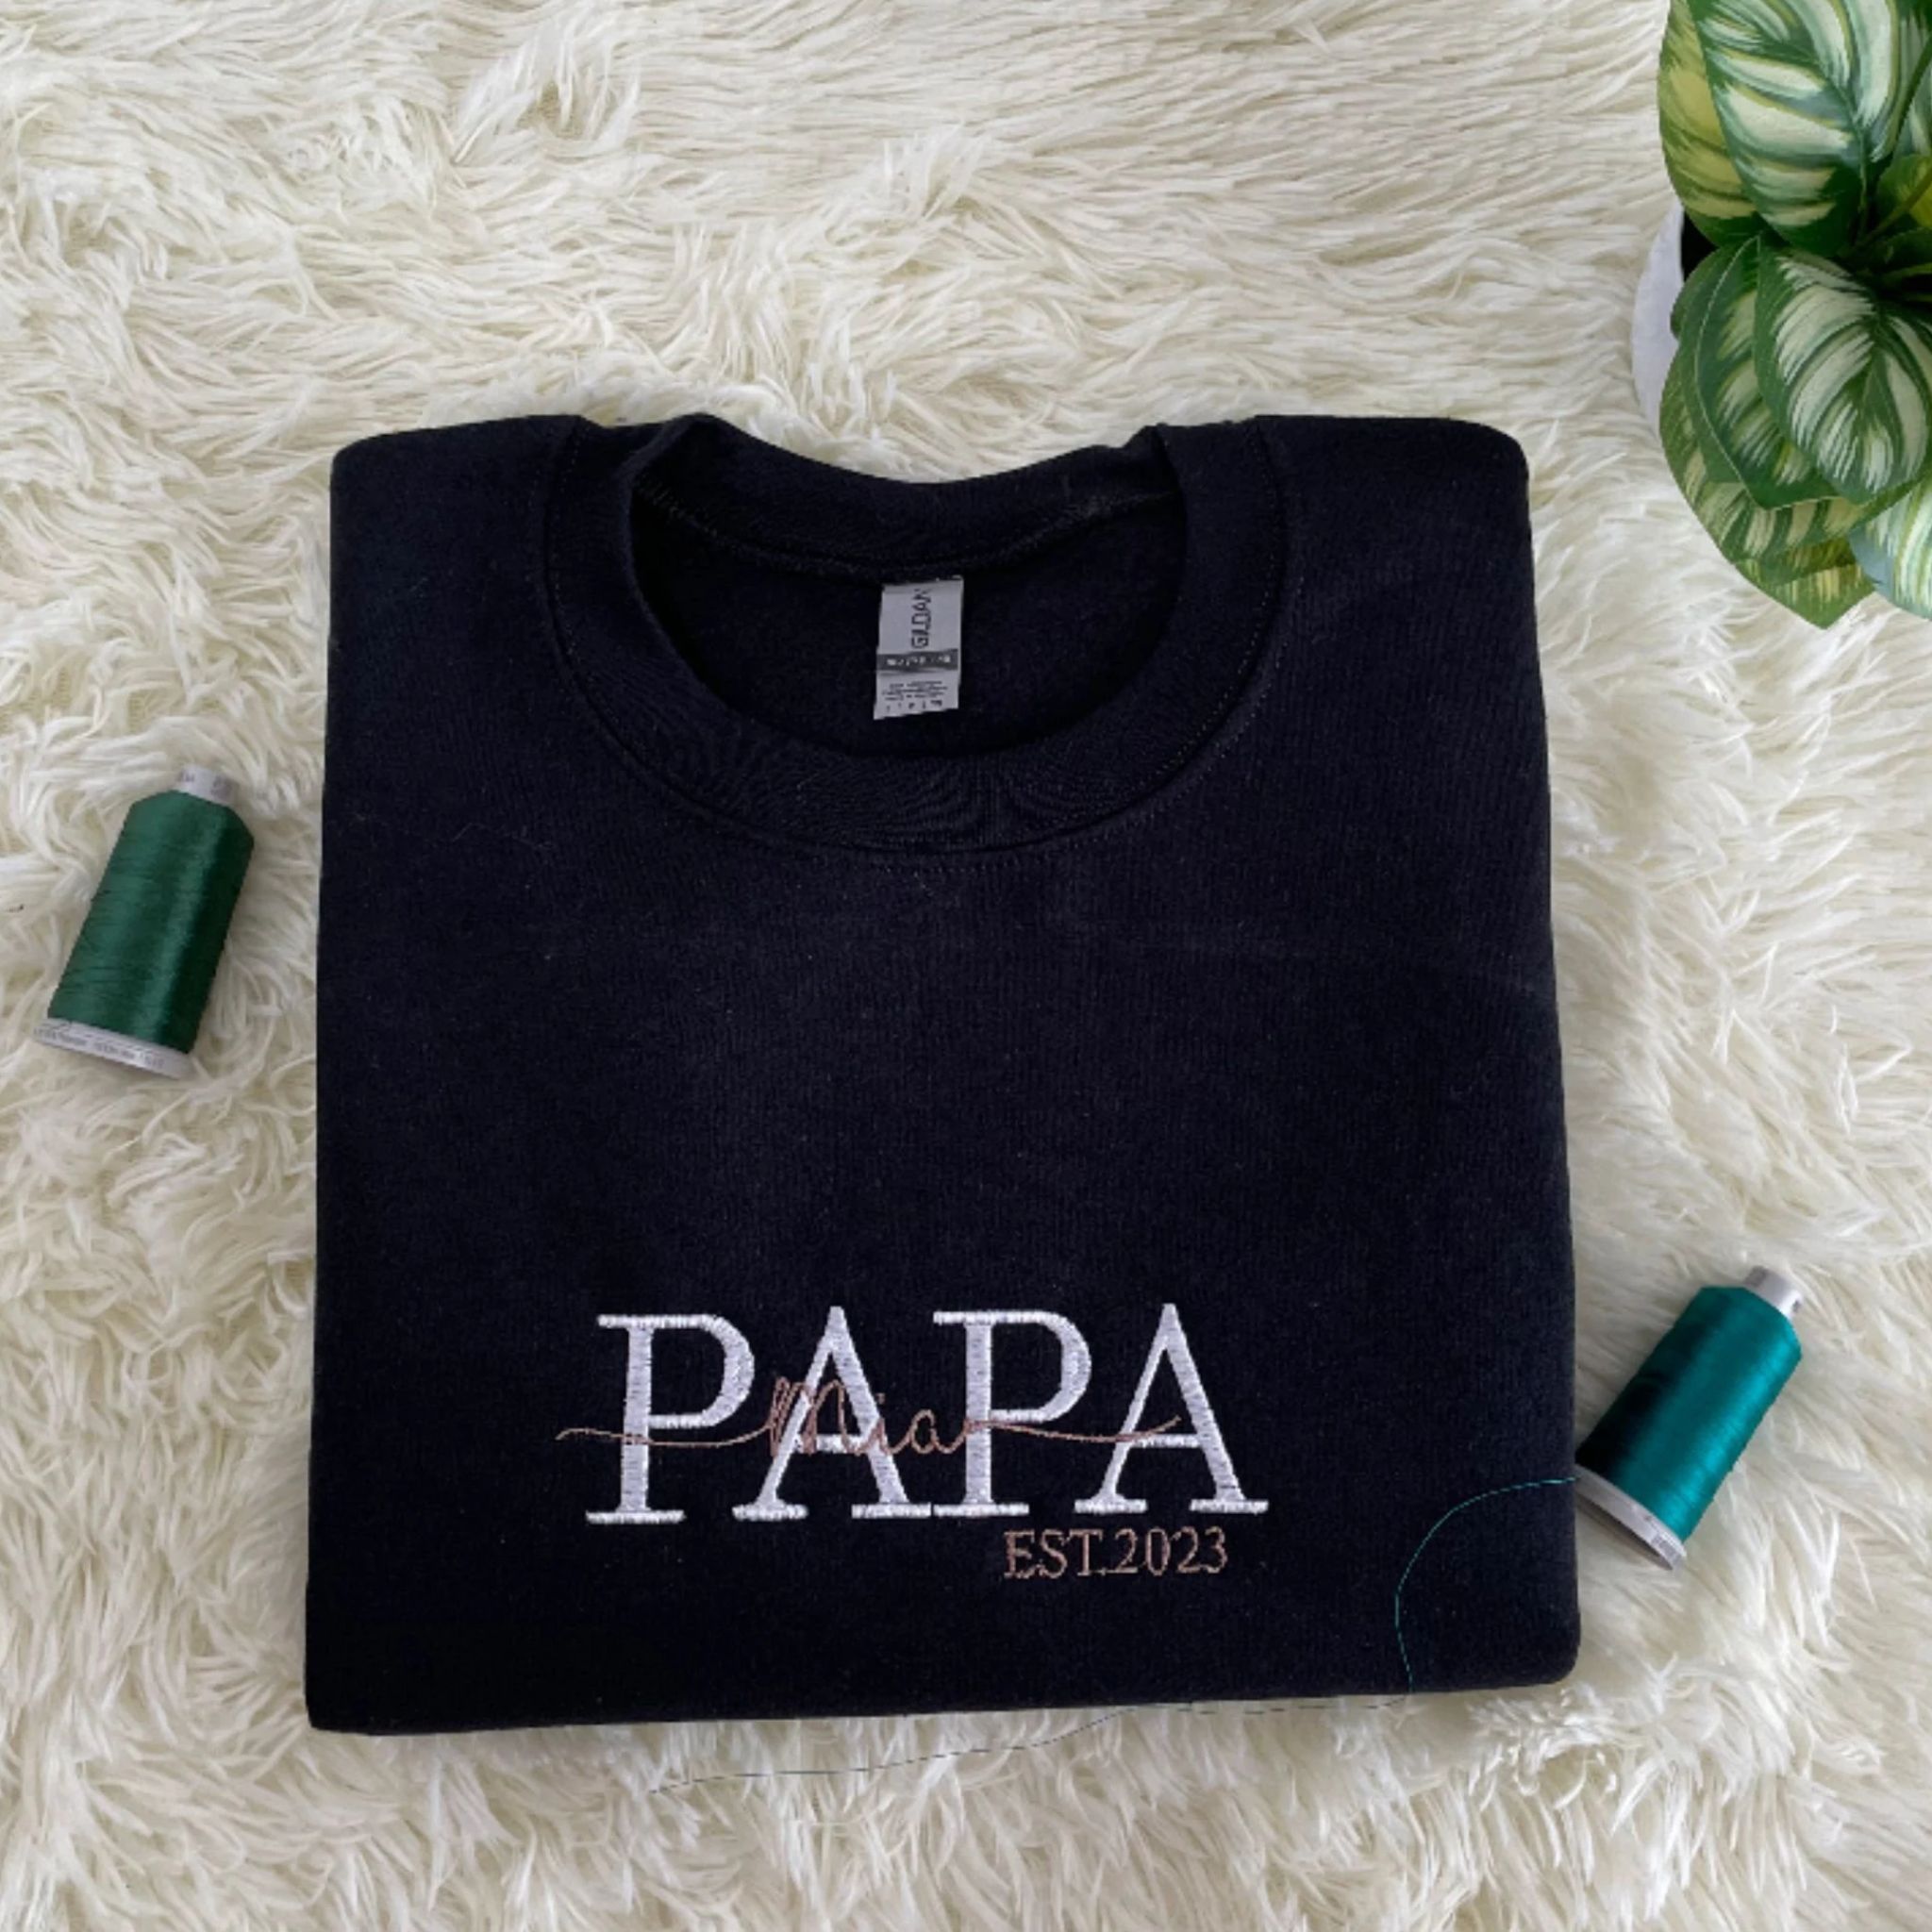 Birthday Gifts for Father | Best Birthday Gifts Ideas for Father/Dad -  IGP.com